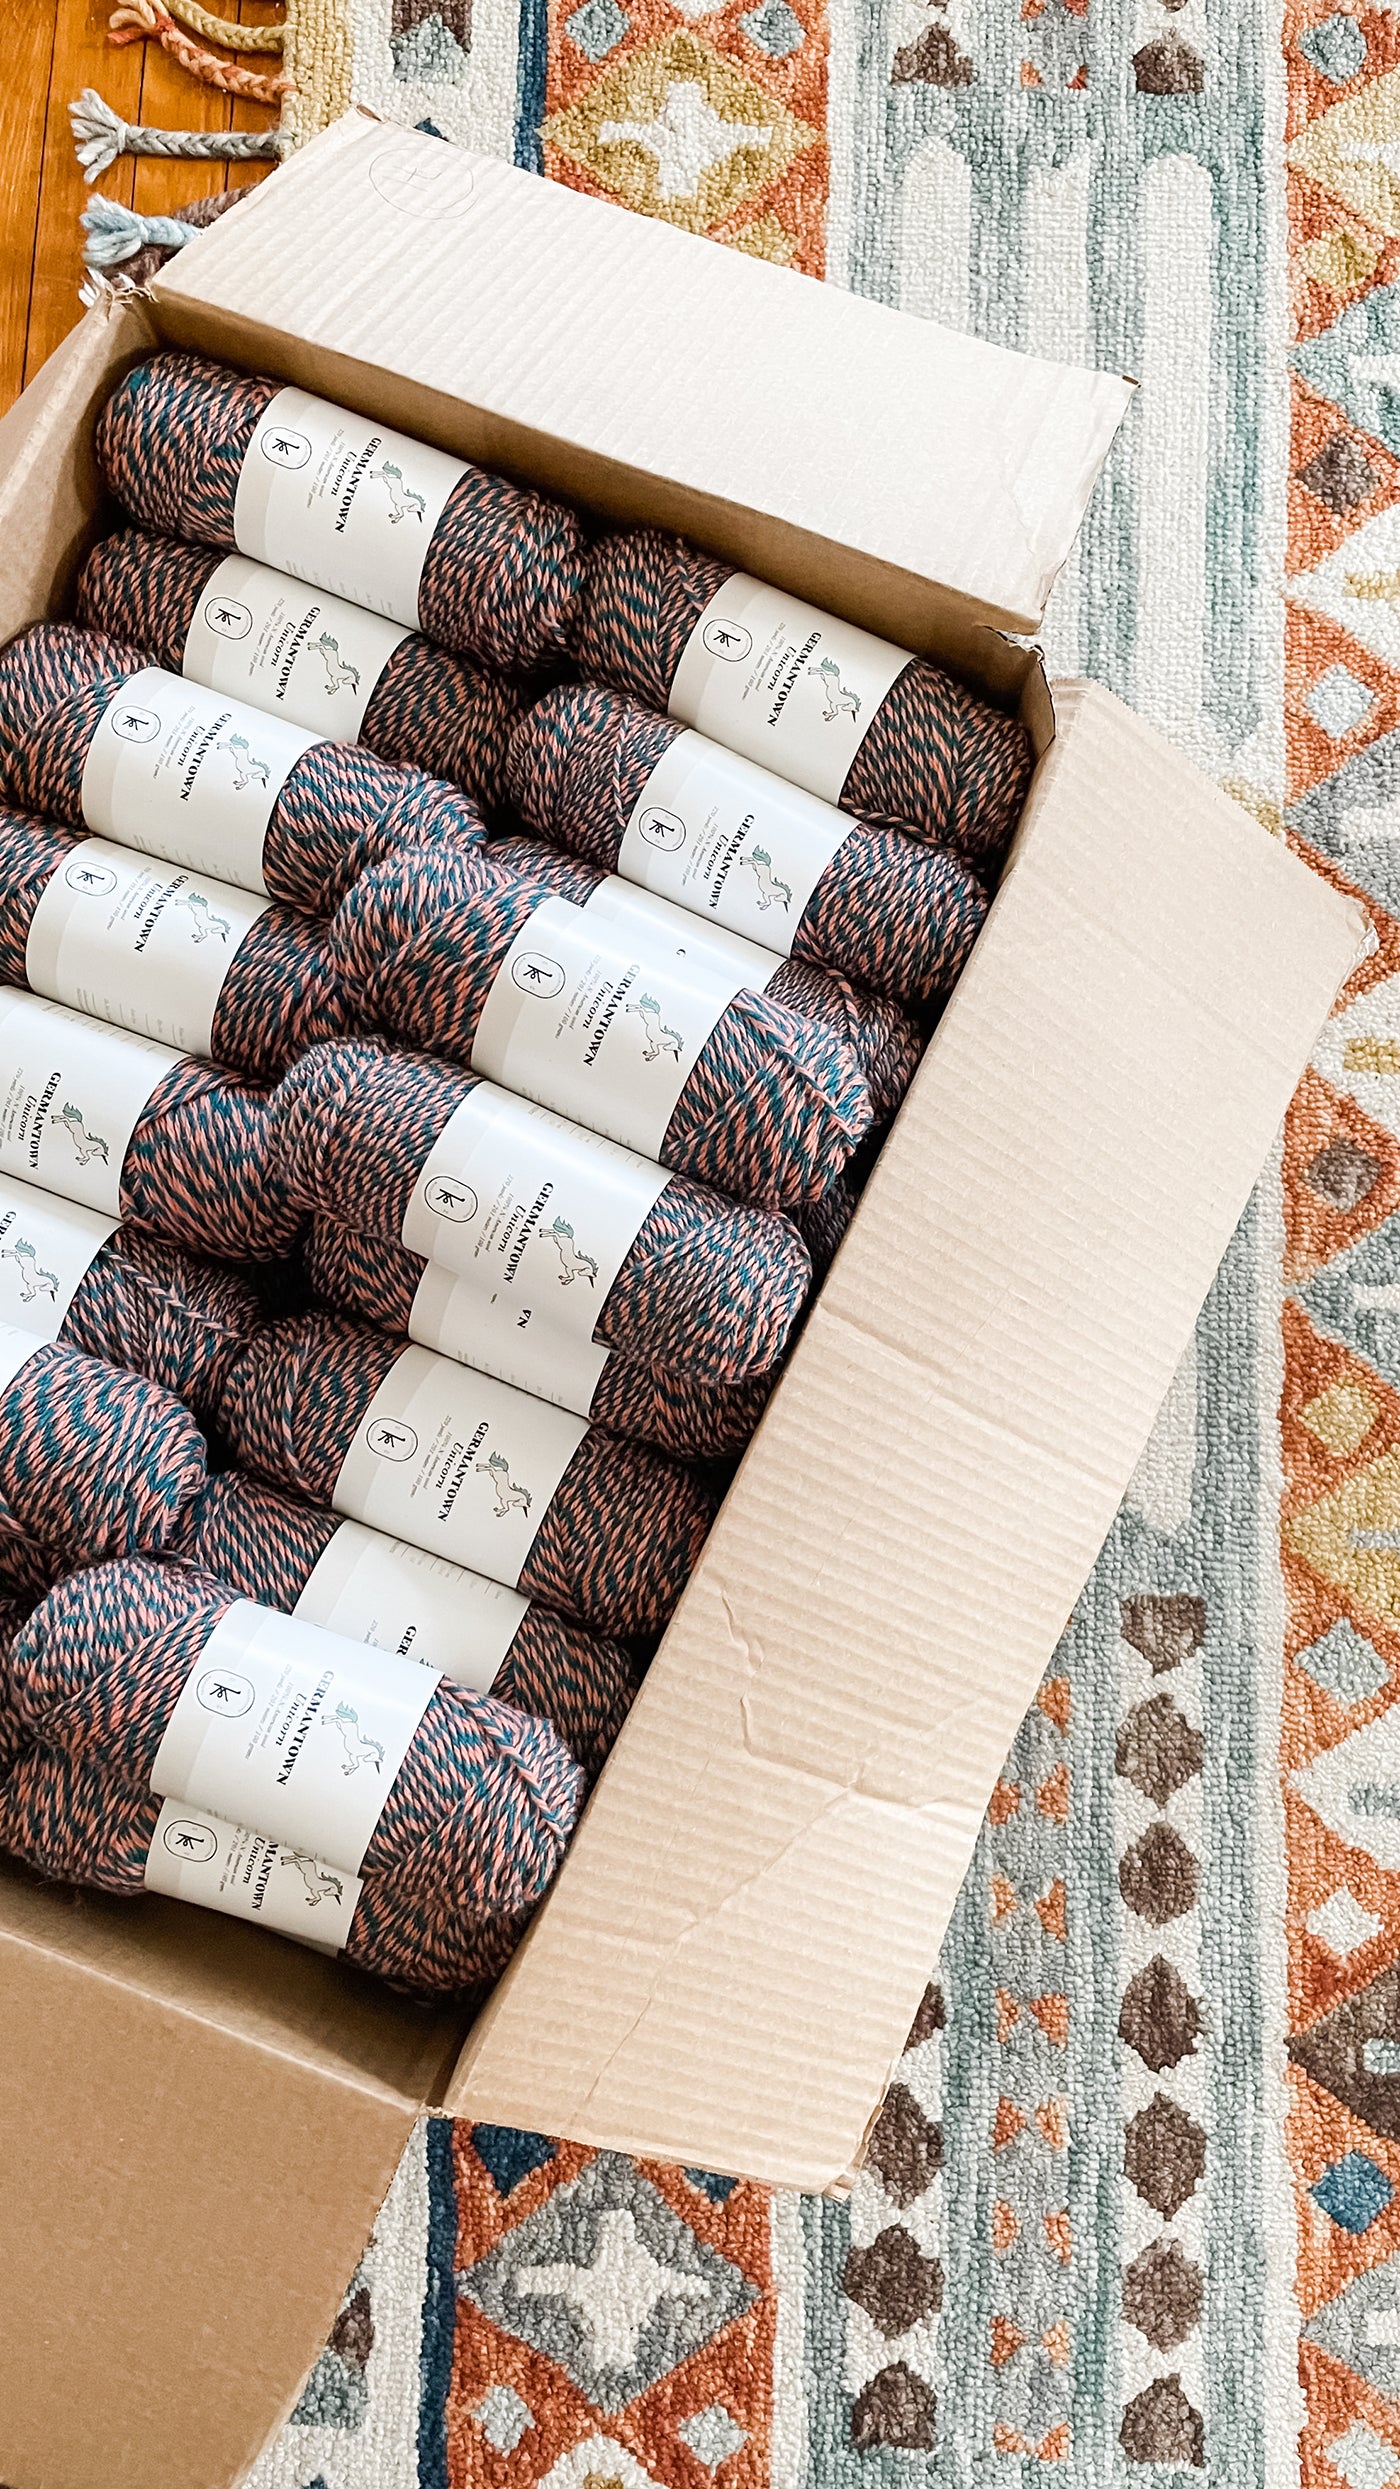 This is an image of a cardboard box full of skeins of yarn. 